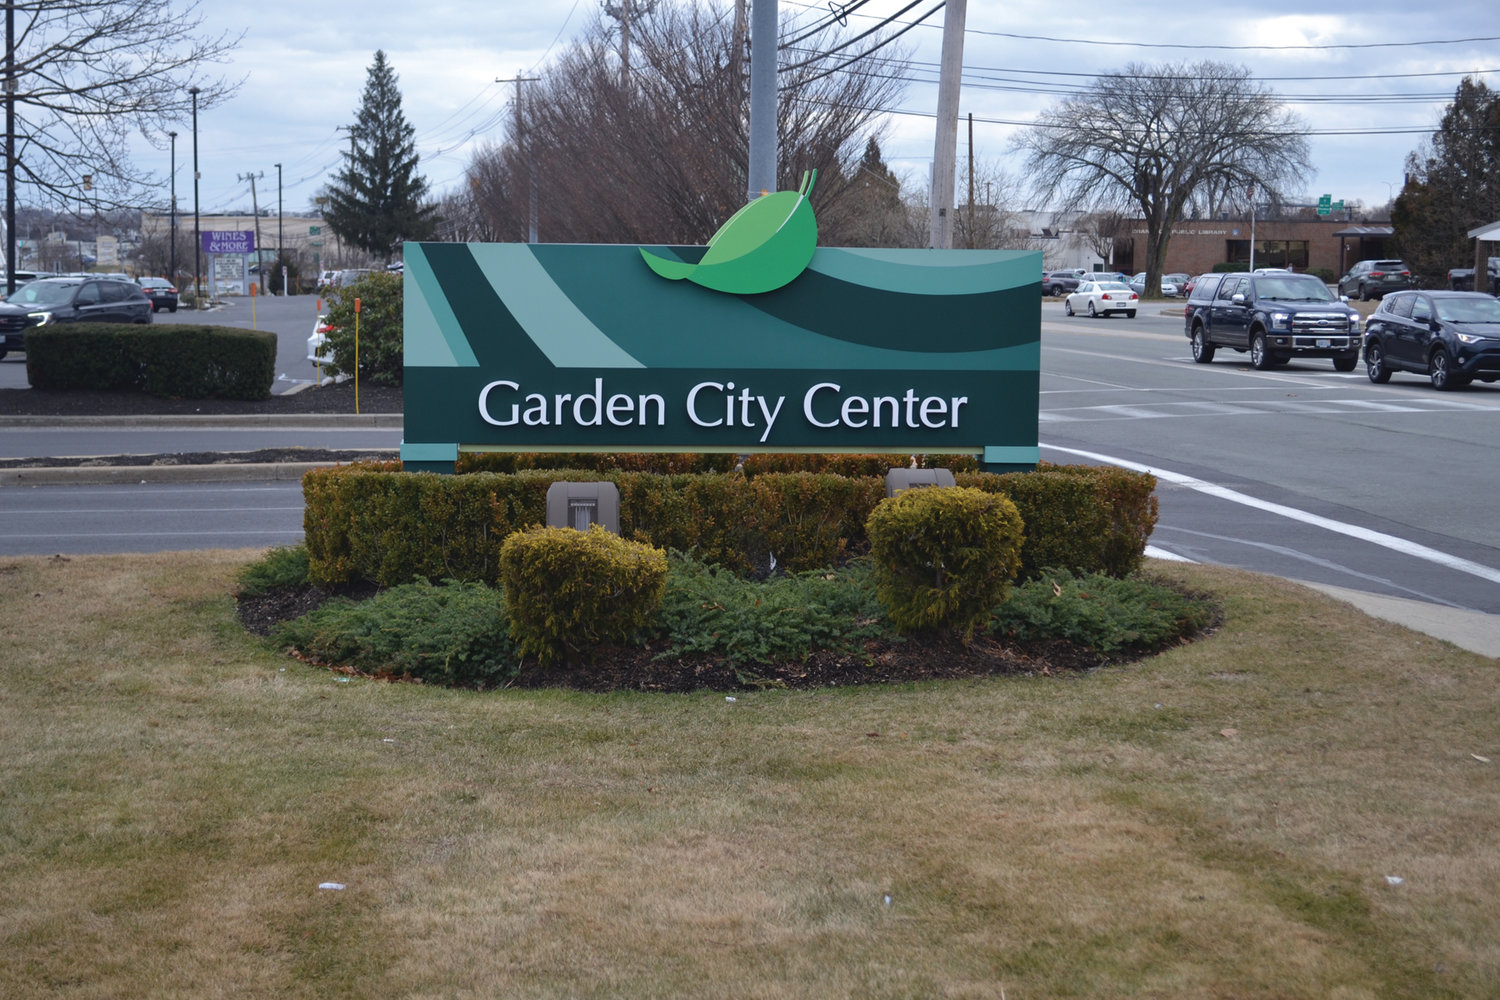 NEW CHAPTER: Garden City Center, which opened in 1948, has been acquired by a Massachusetts-based developer.